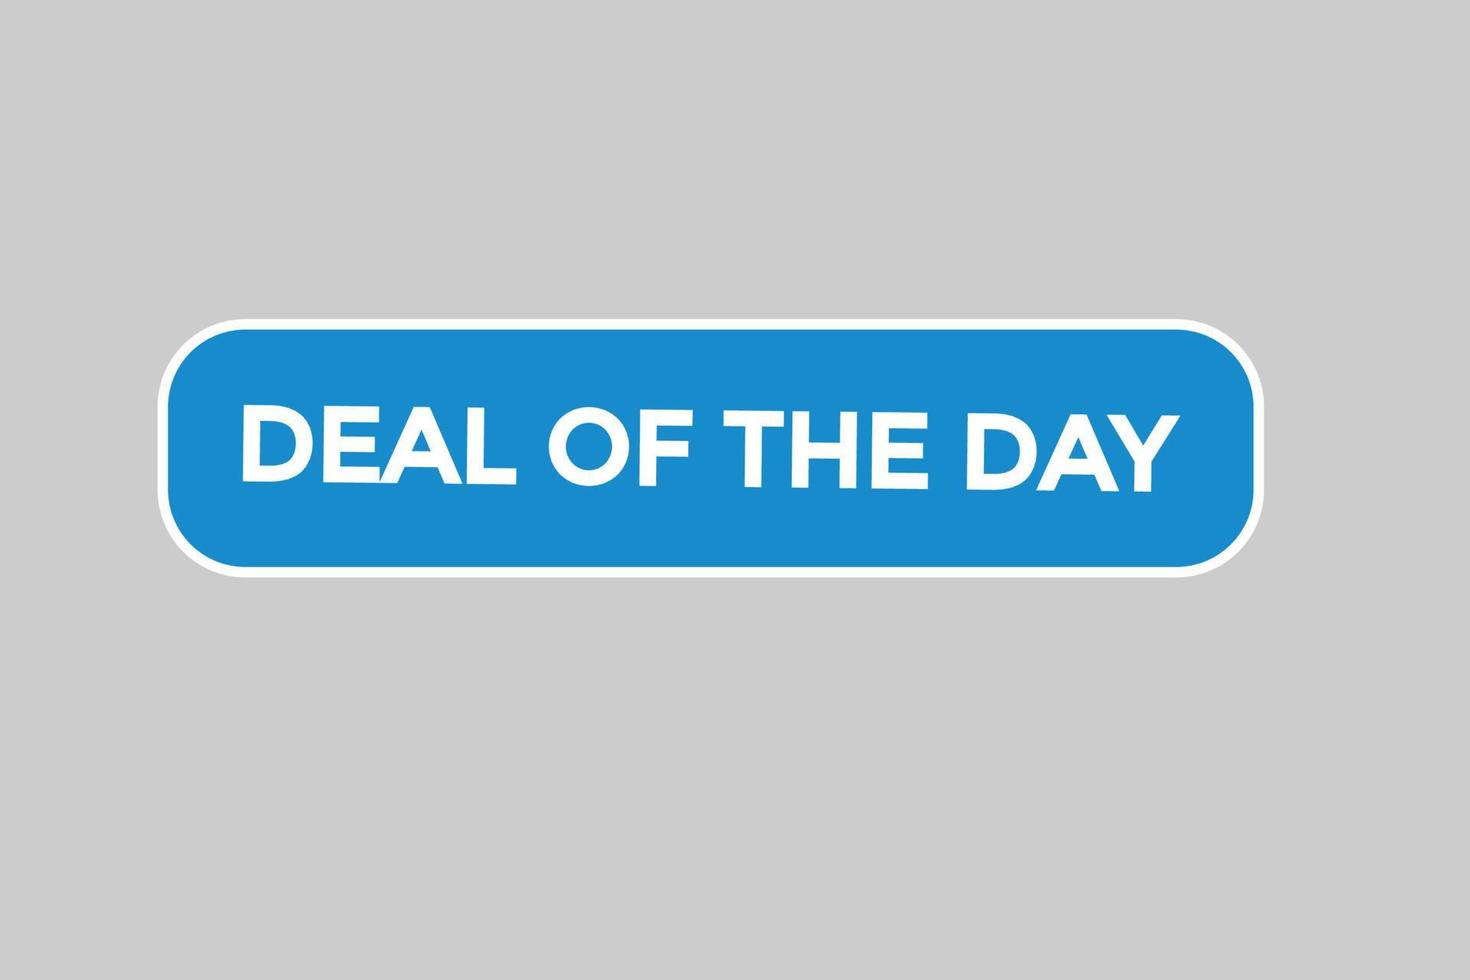 deal of the day button vectors.sign label speech bubble deal of the day vector